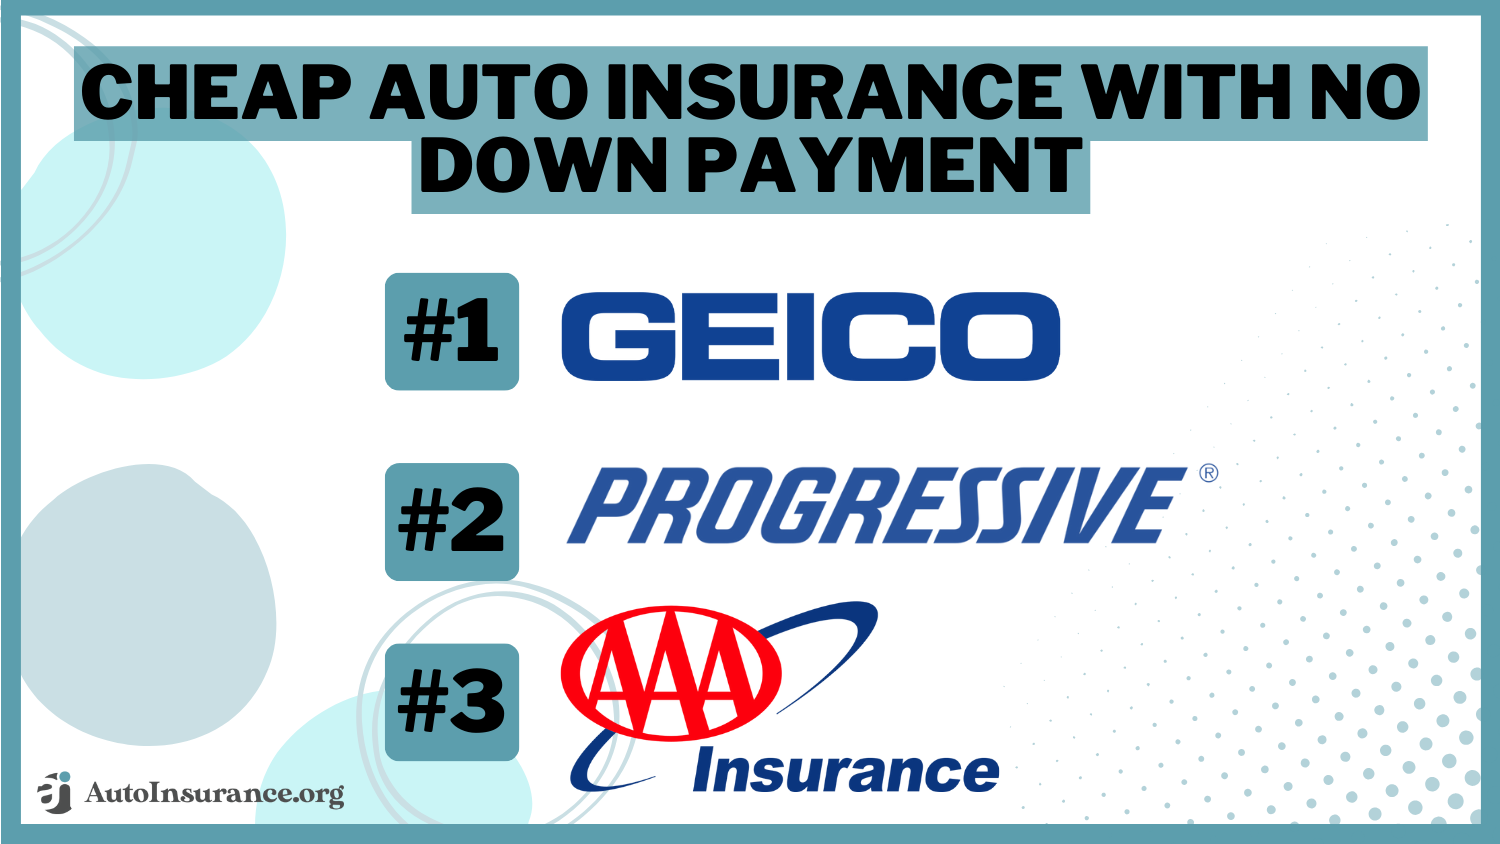 Geico, Progressive and AAA: Top 3 Cheap Auto Insurance With No Down Payment